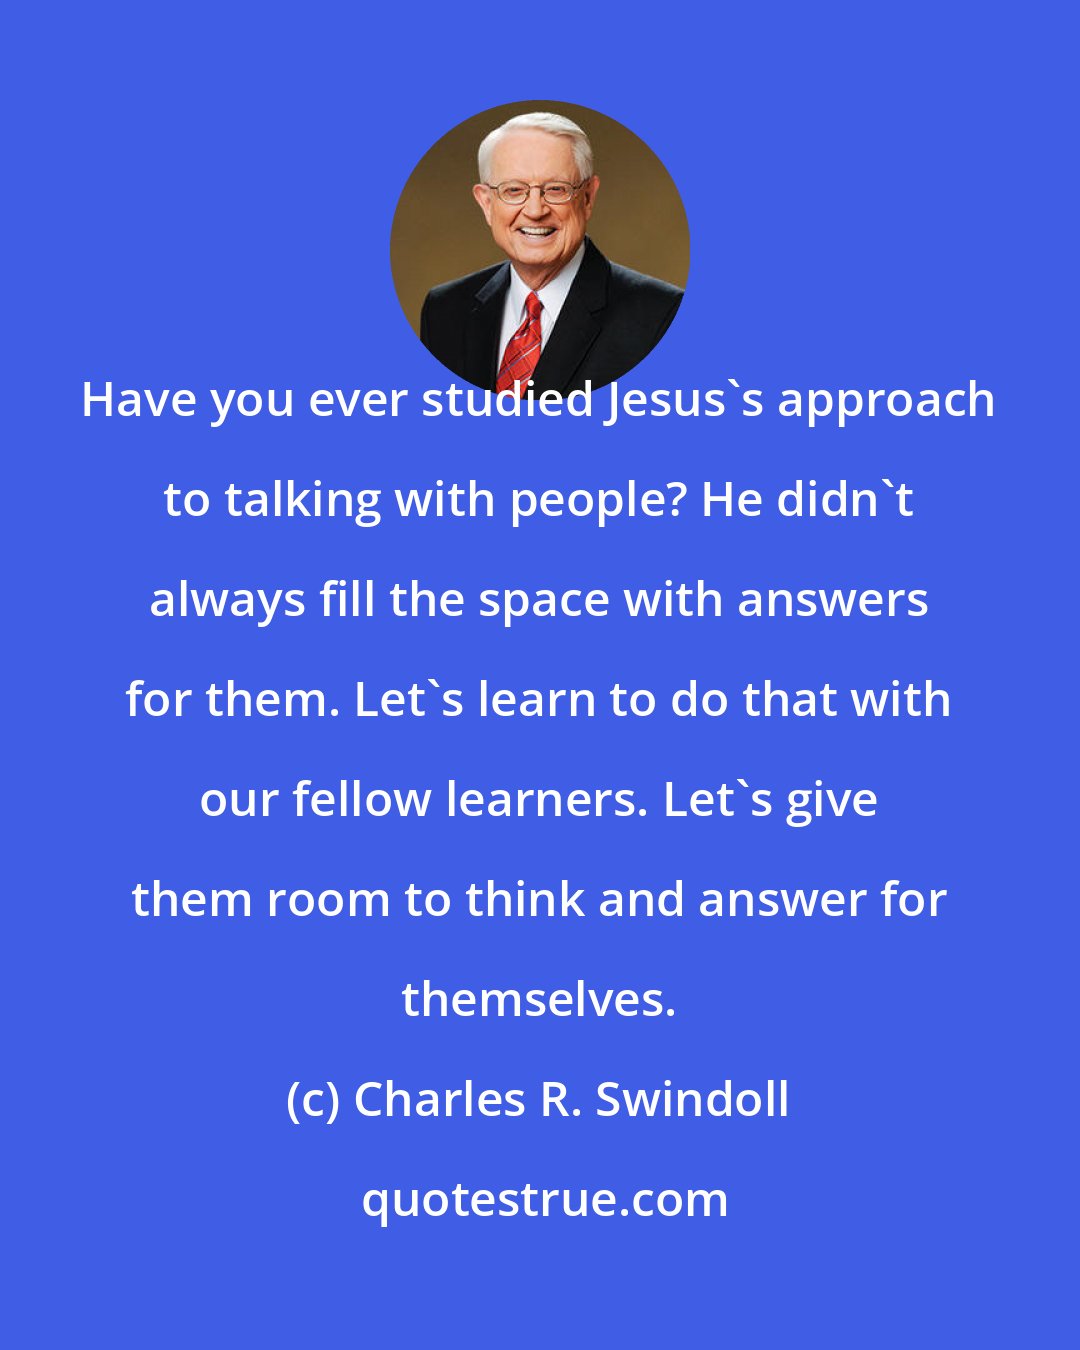 Charles R. Swindoll: Have you ever studied Jesus's approach to talking with people? He didn't always fill the space with answers for them. Let's learn to do that with our fellow learners. Let's give them room to think and answer for themselves.